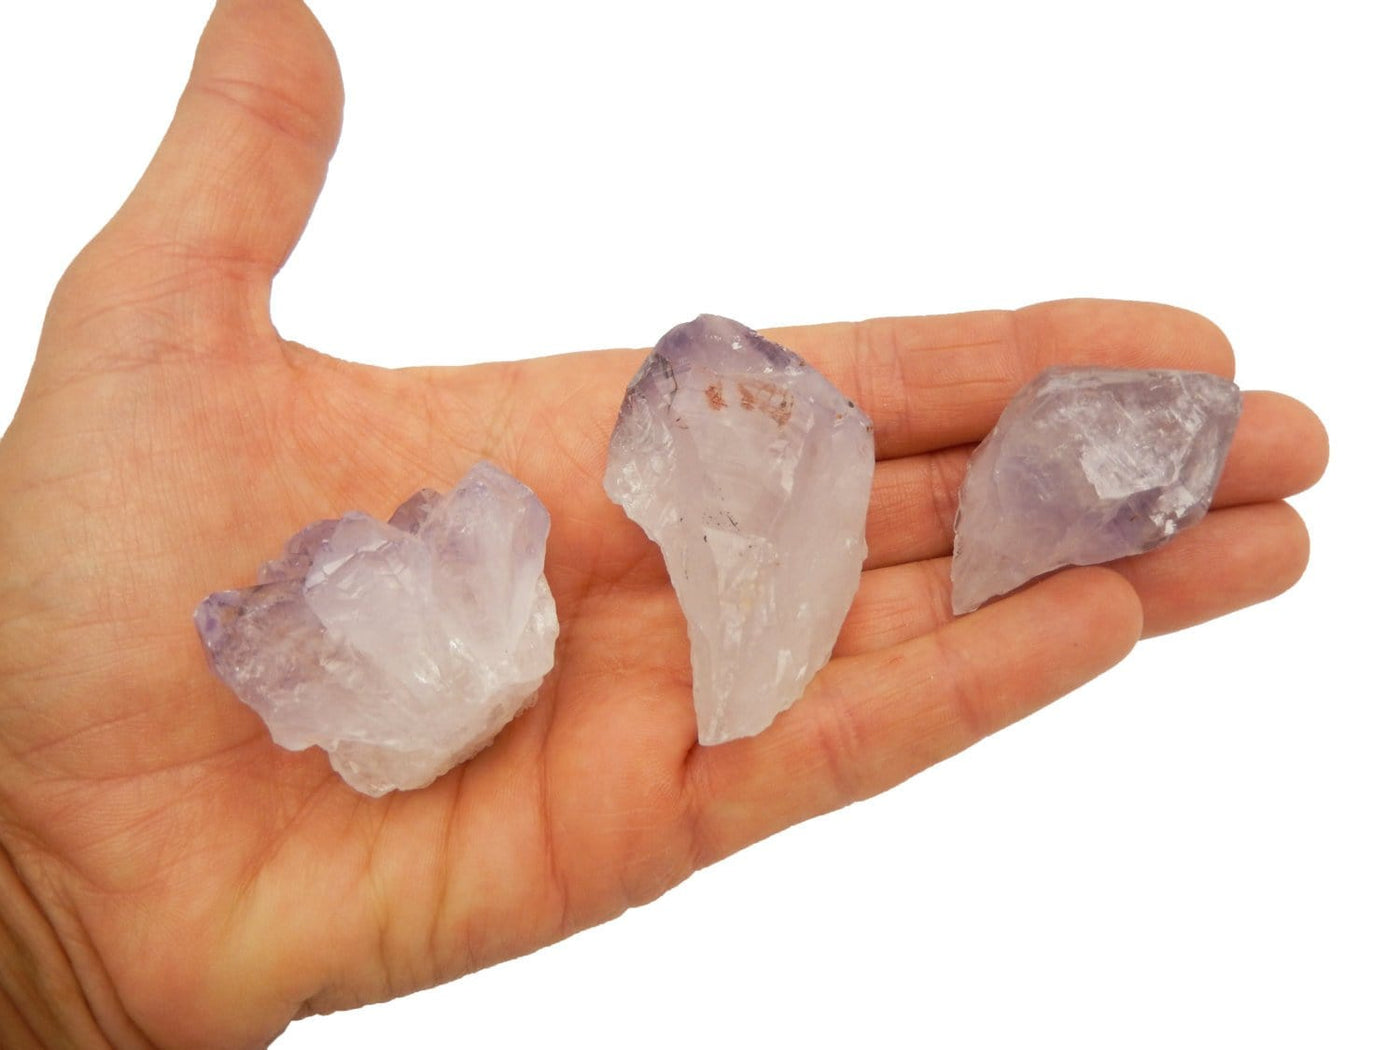 3 single amethyst points being held for size reference.